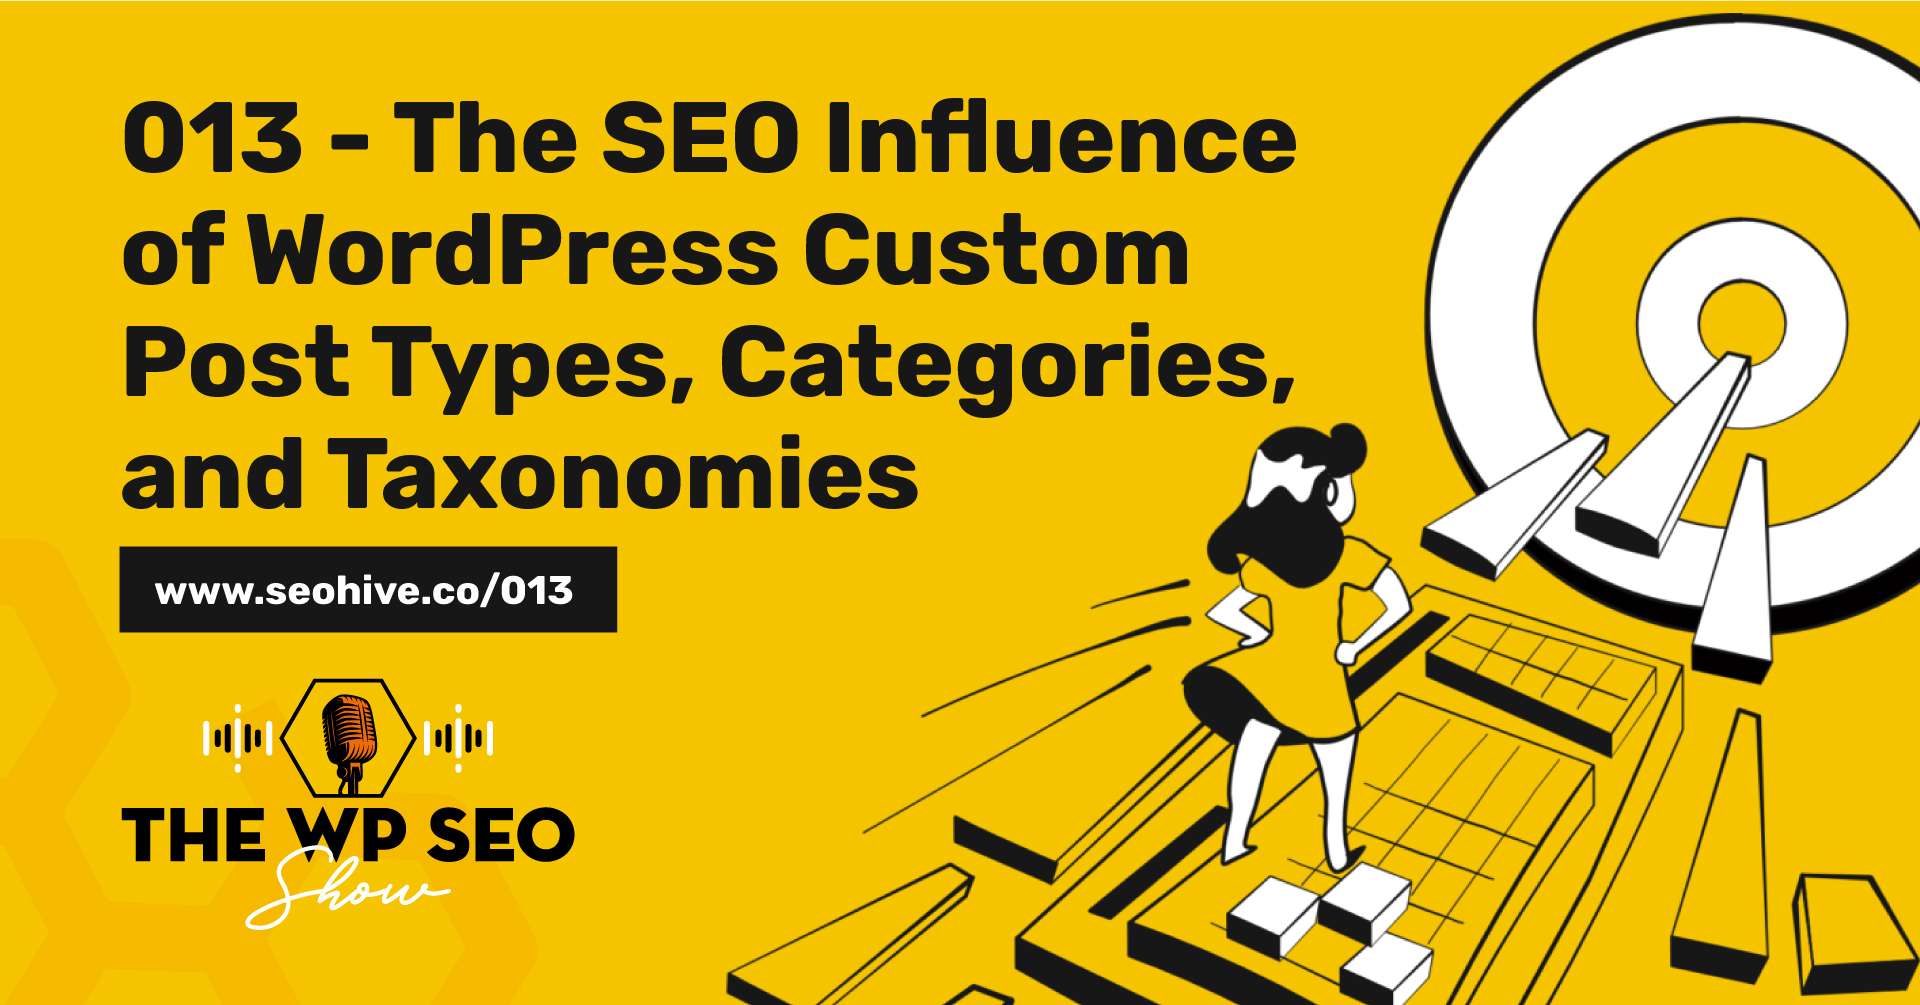 013 – The SEO Influence of WordPress Custom Post Types, Categories, and Taxonomies